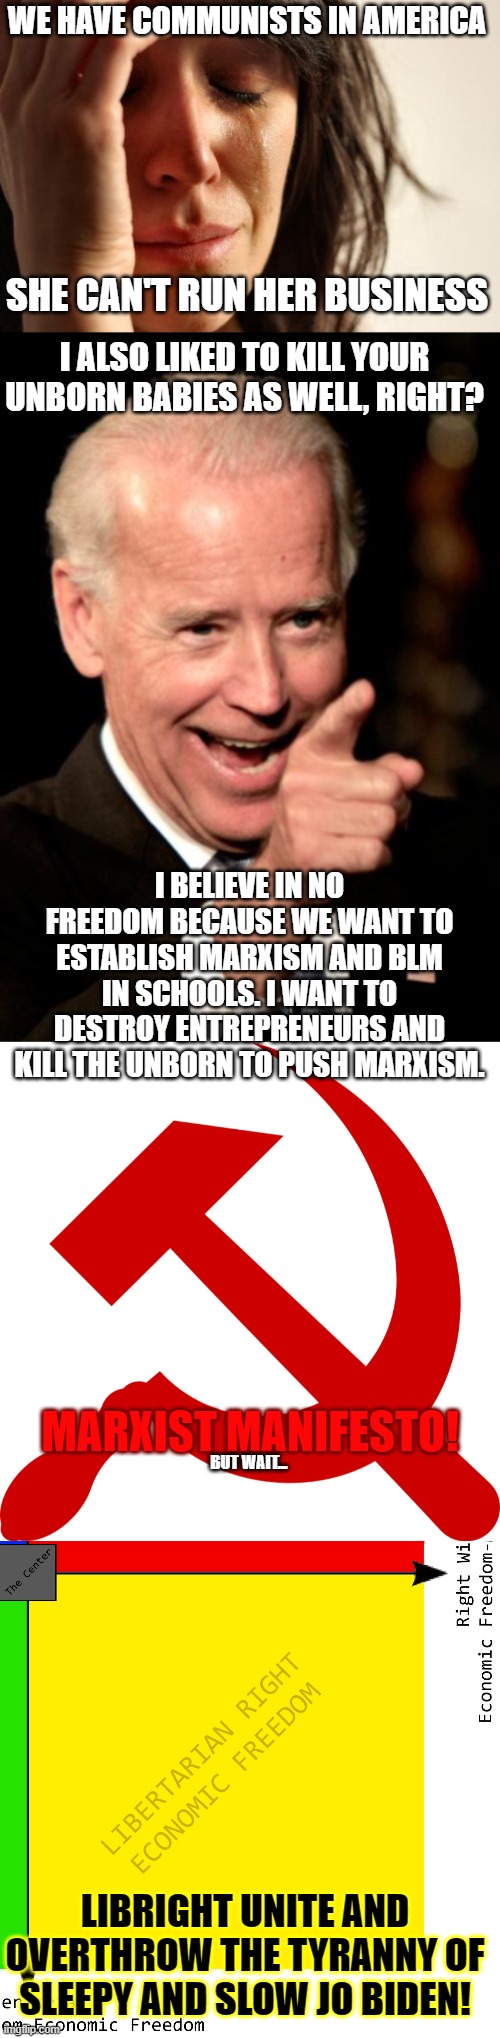 Libertarians and conservatives unite! | WE HAVE COMMUNISTS IN AMERICA; SHE CAN'T RUN HER BUSINESS; I ALSO LIKED TO KILL YOUR UNBORN BABIES AS WELL, RIGHT? I BELIEVE IN NO FREEDOM BECAUSE WE WANT TO ESTABLISH MARXISM AND BLM IN SCHOOLS. I WANT TO DESTROY ENTREPRENEURS AND KILL THE UNBORN TO PUSH MARXISM. MARXIST MANIFESTO! BUT WAIT... LIBRIGHT UNITE AND OVERTHROW THE TYRANNY OF SLEEPY AND SLOW JO BIDEN! | image tagged in memes,first world problems,smilin biden,communism,abortion is murder,marxism | made w/ Imgflip meme maker